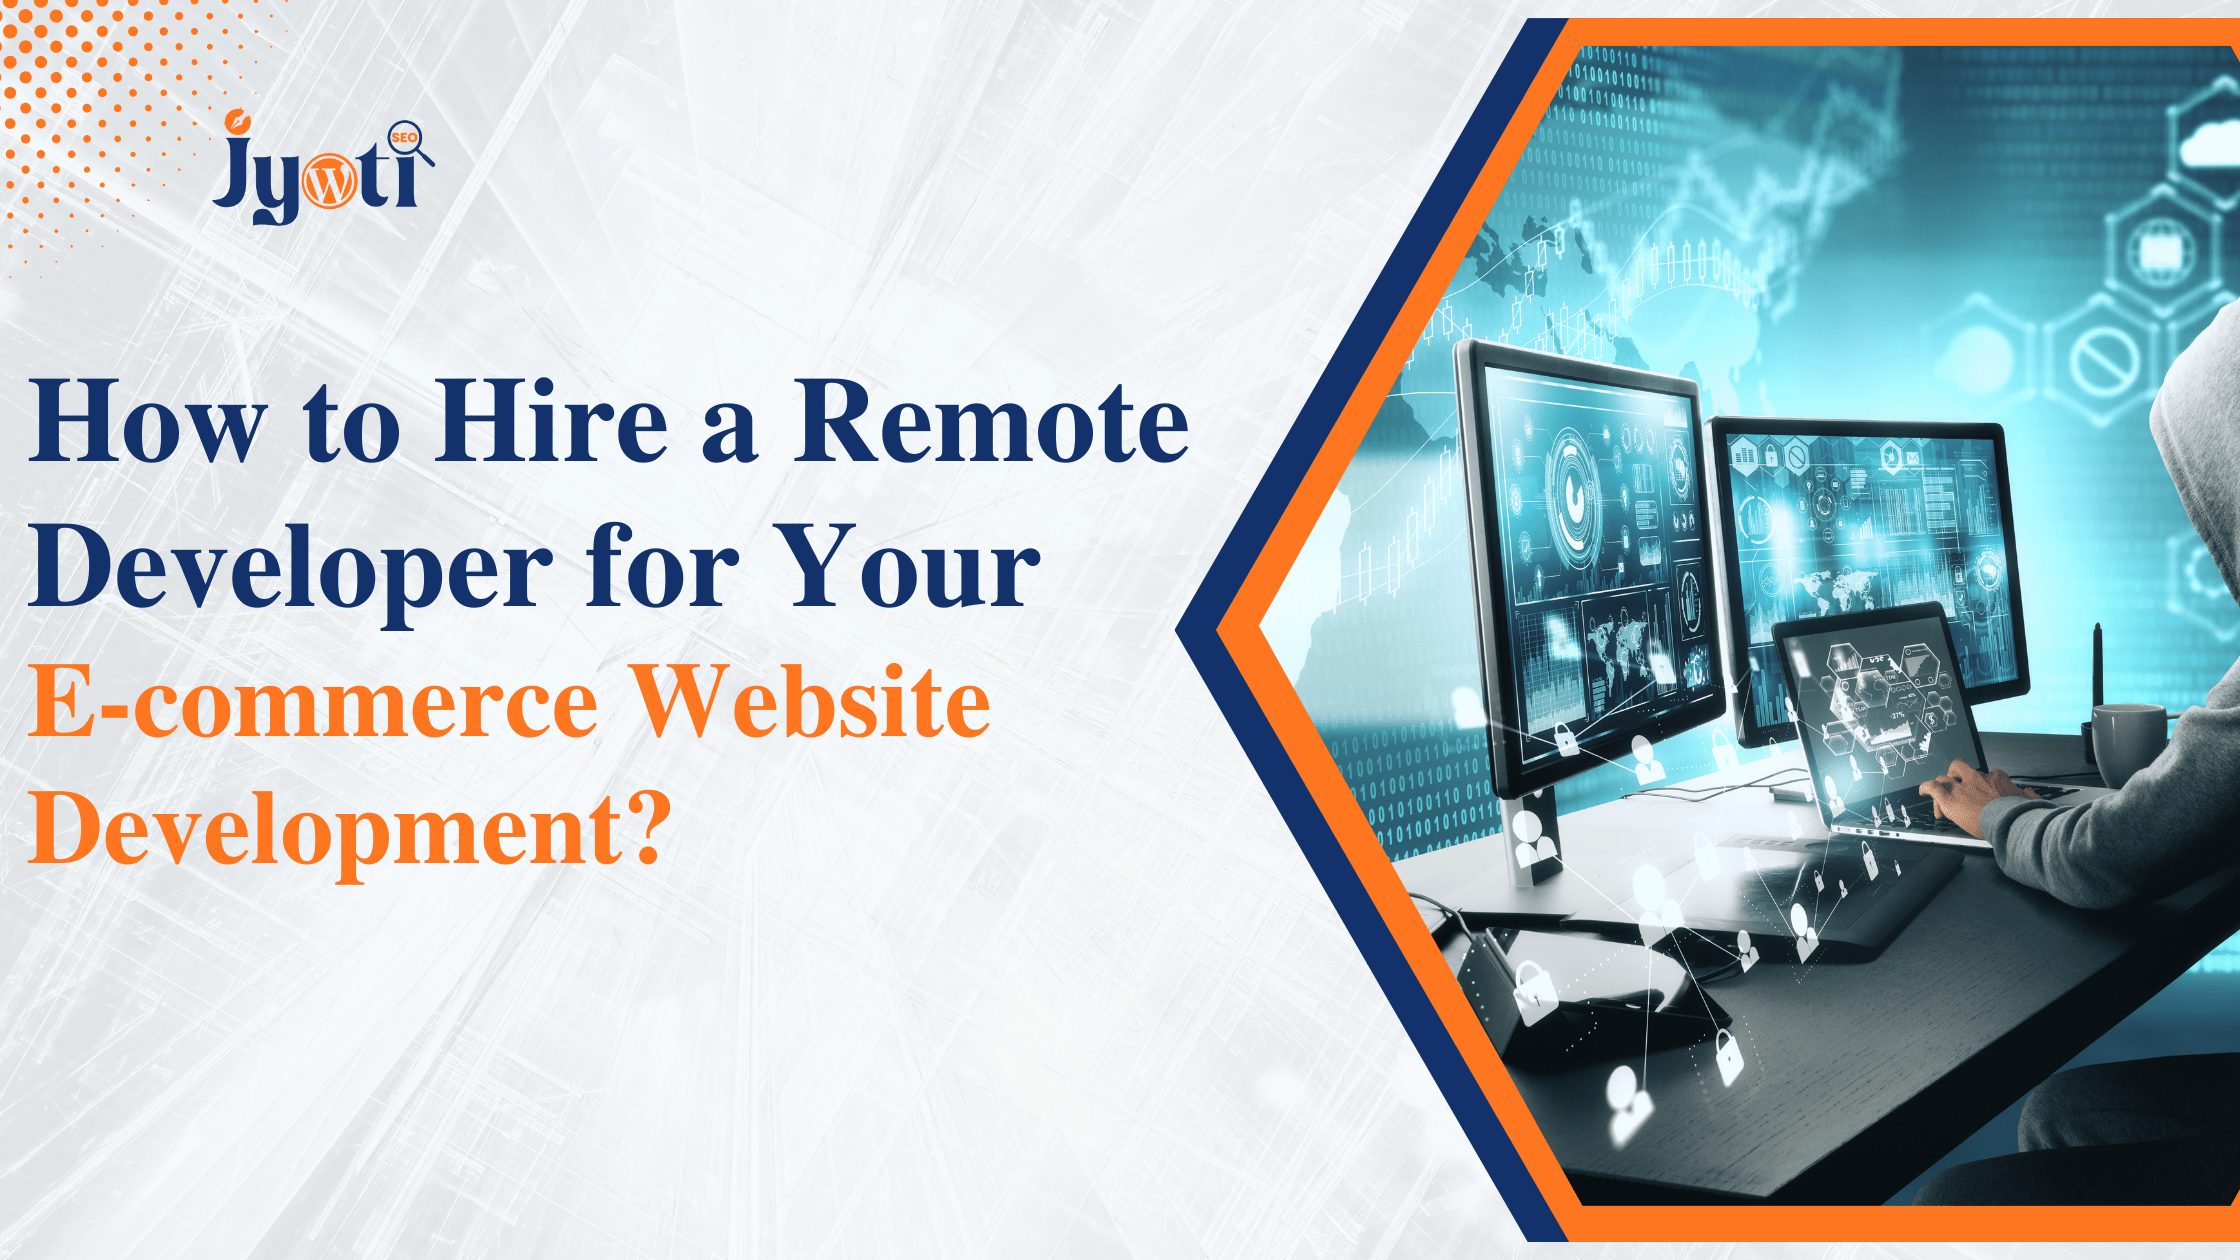 How to Hire a Remote Developer for Your E-commerce Website Development?